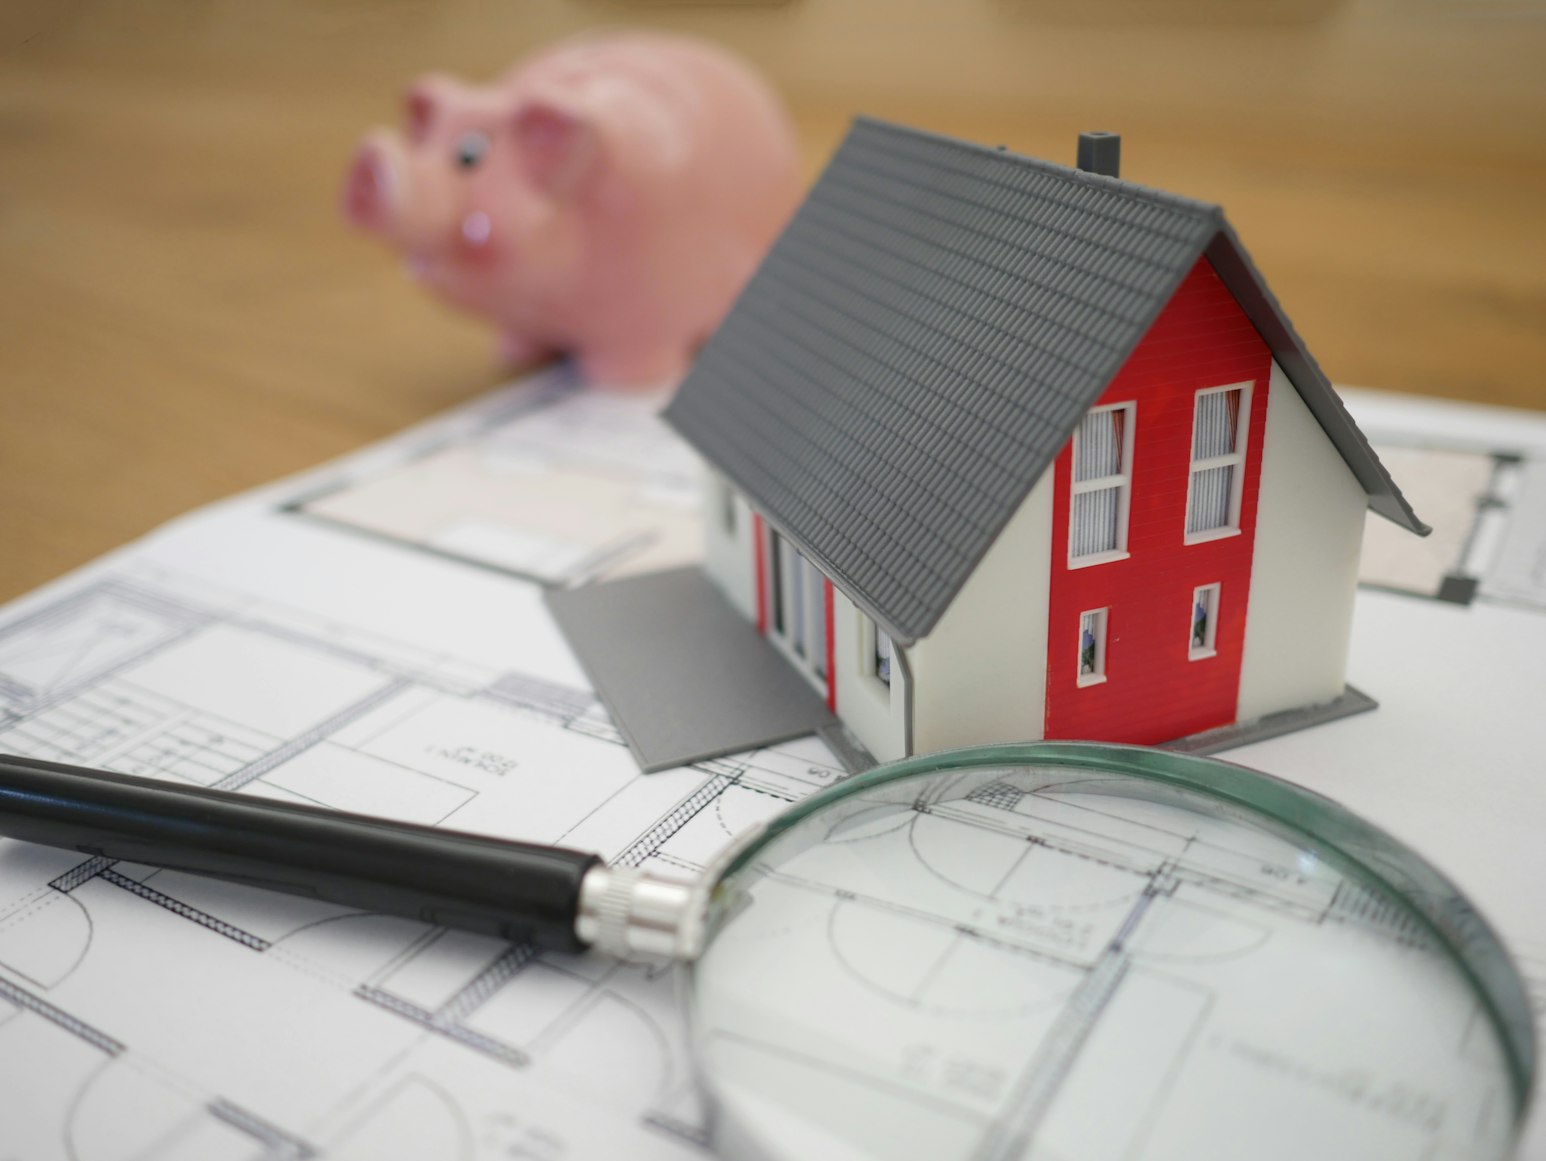 A miniature house, piggy bank, and magnifying glass placed on blueprints.